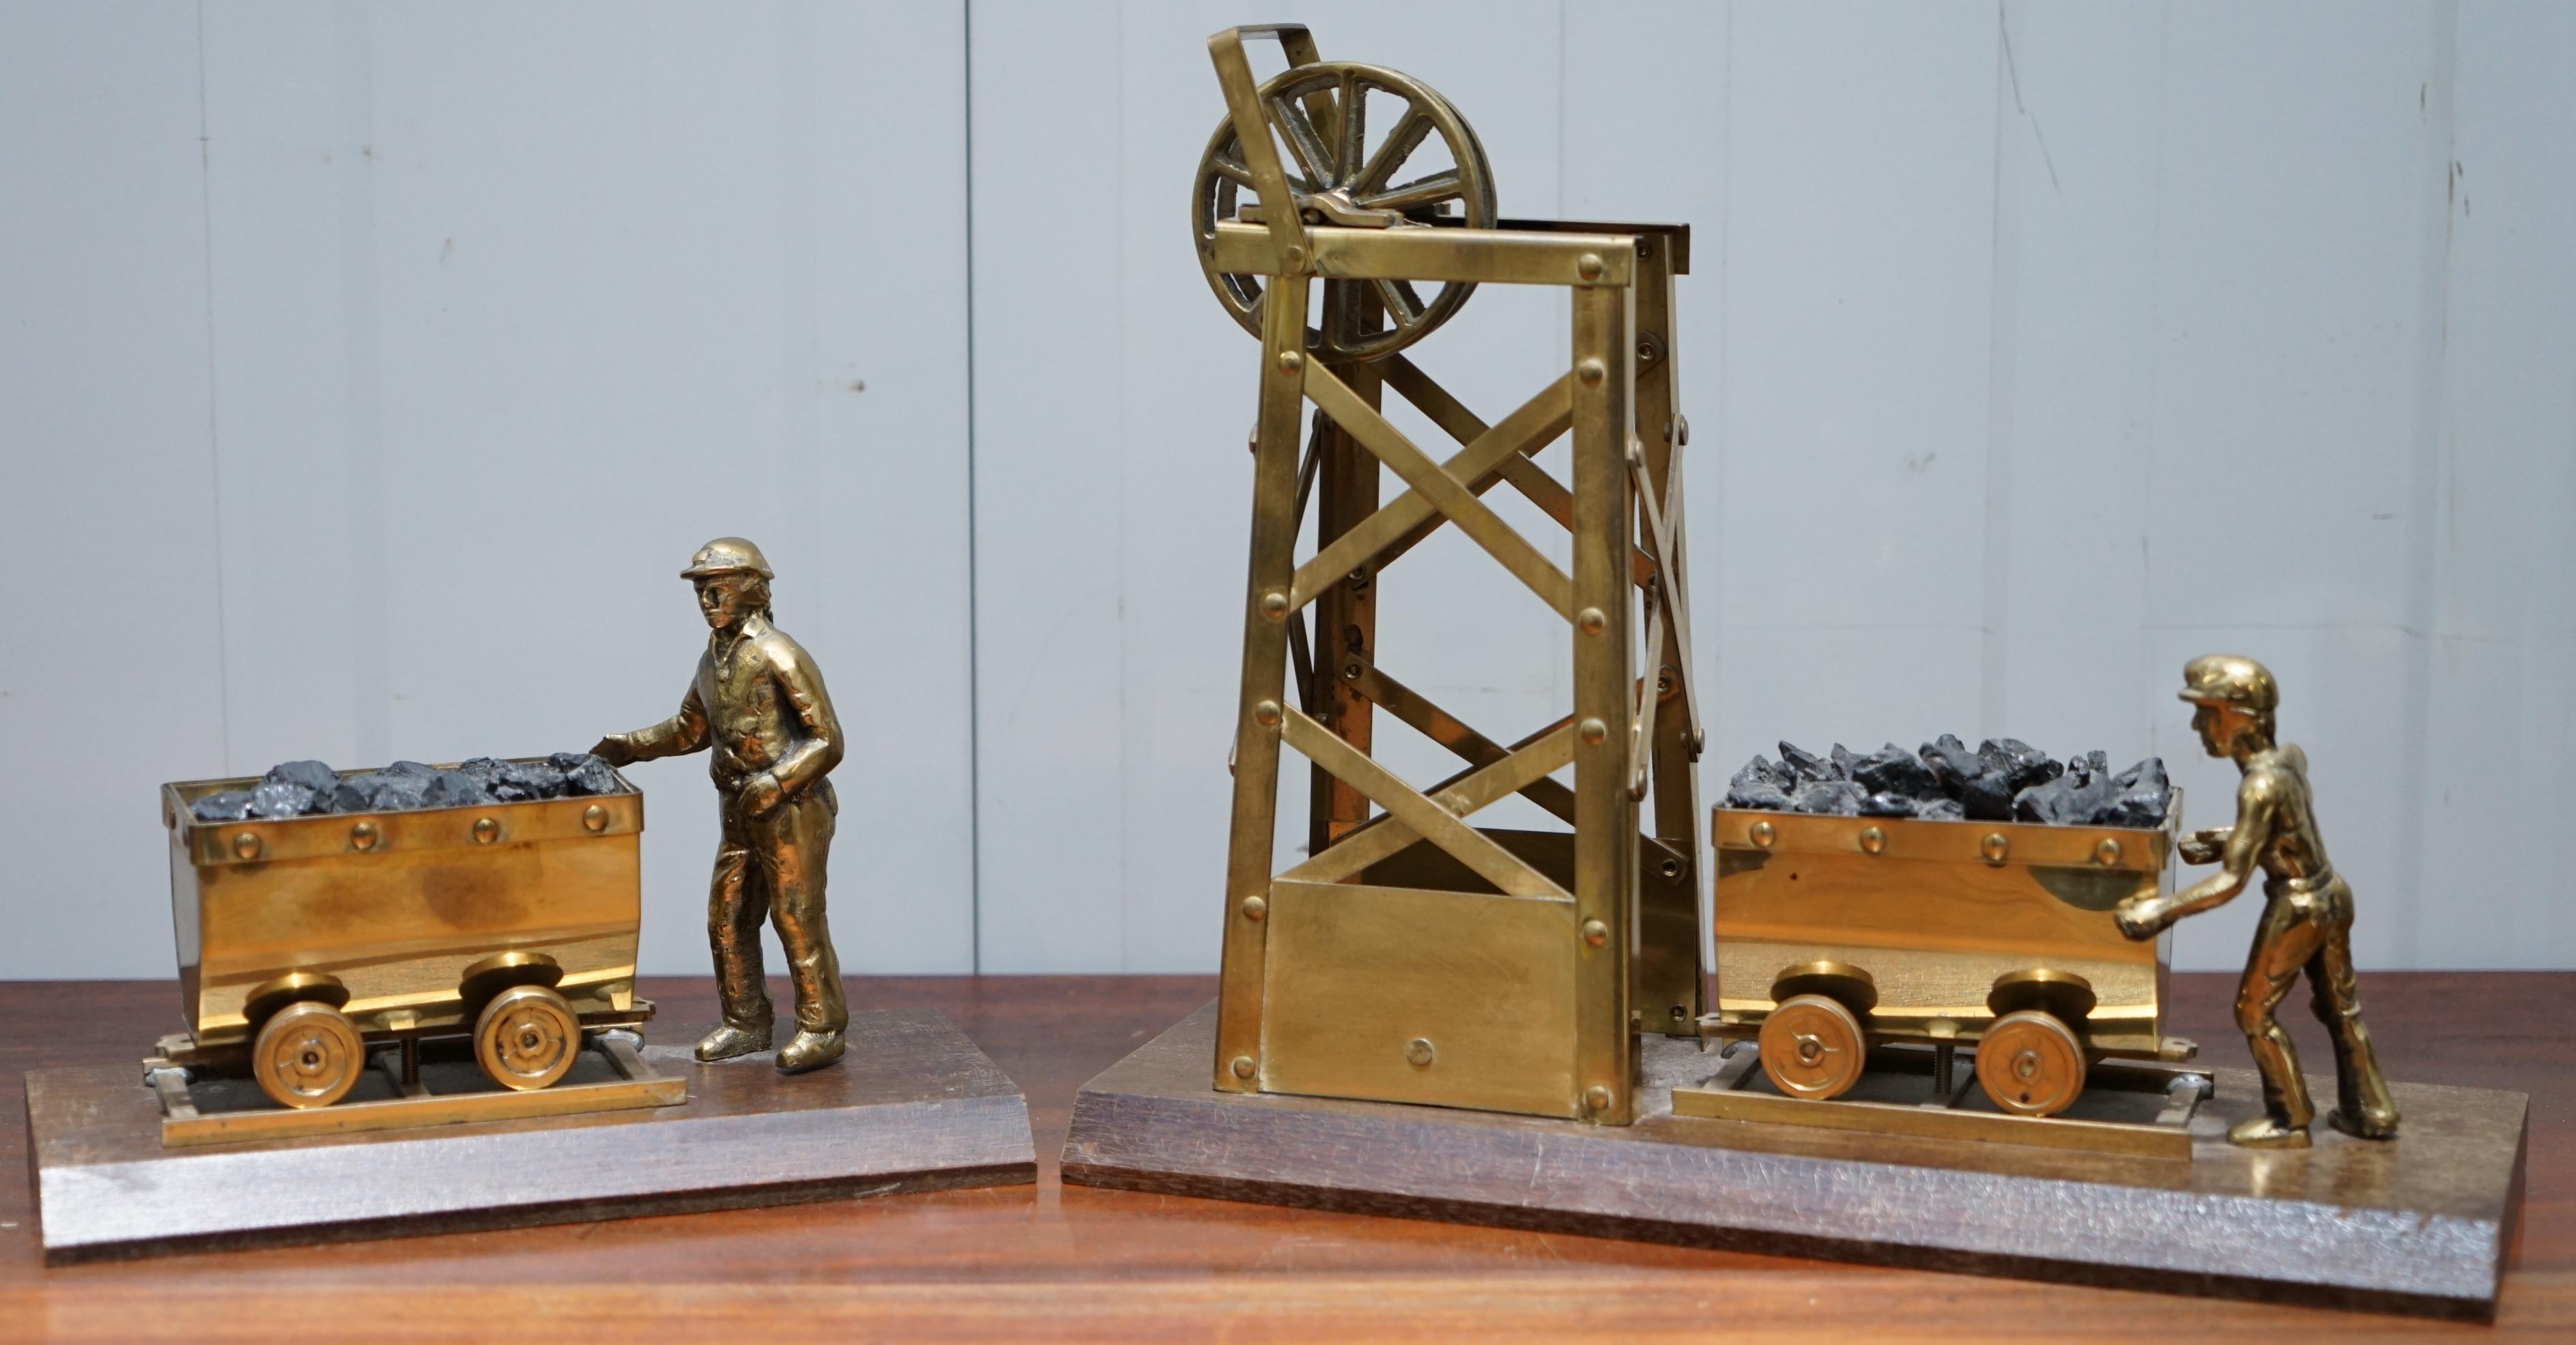 We are delighted to offer for sale this lovely display of a pair of statues and a miner’s safety lamp 

A good looking and decorative set, both statues are nicely cast in brass, the wheel has movement to it at the top of the large statue, the lamp